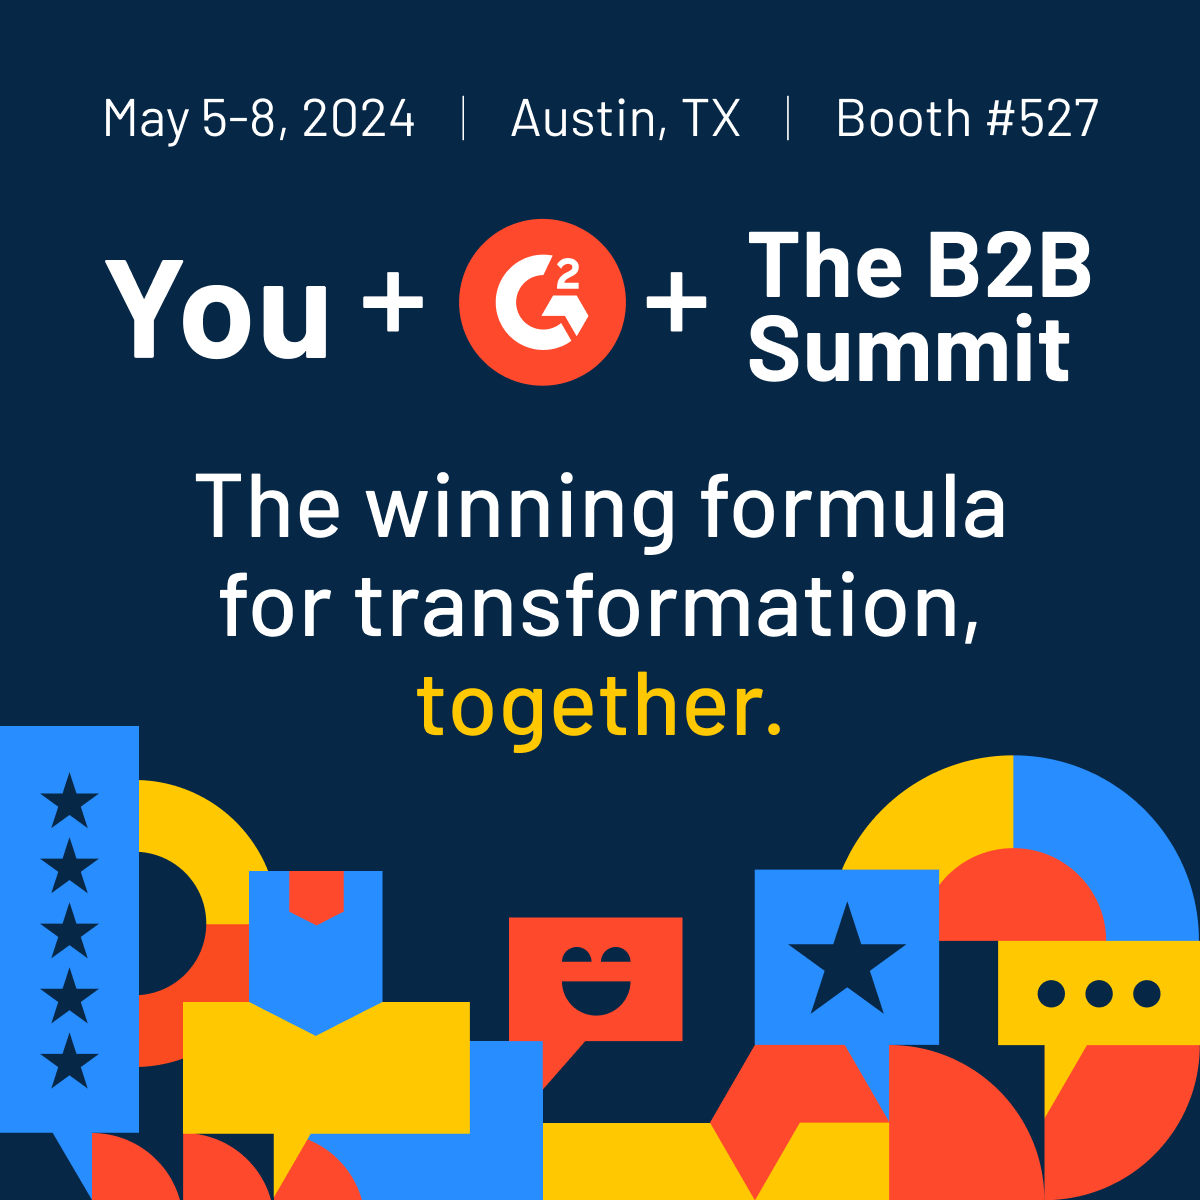 It’s May, which means @forrester B2B Summit is right around the corner! 🤠 👋 Swing by Booth #527 to chat live 👋 Reserve time with one of our experts (bit.ly/3UjqT4n) 👋 Attend the G2 x @SproutSocial case study session #ForrB2BSummit